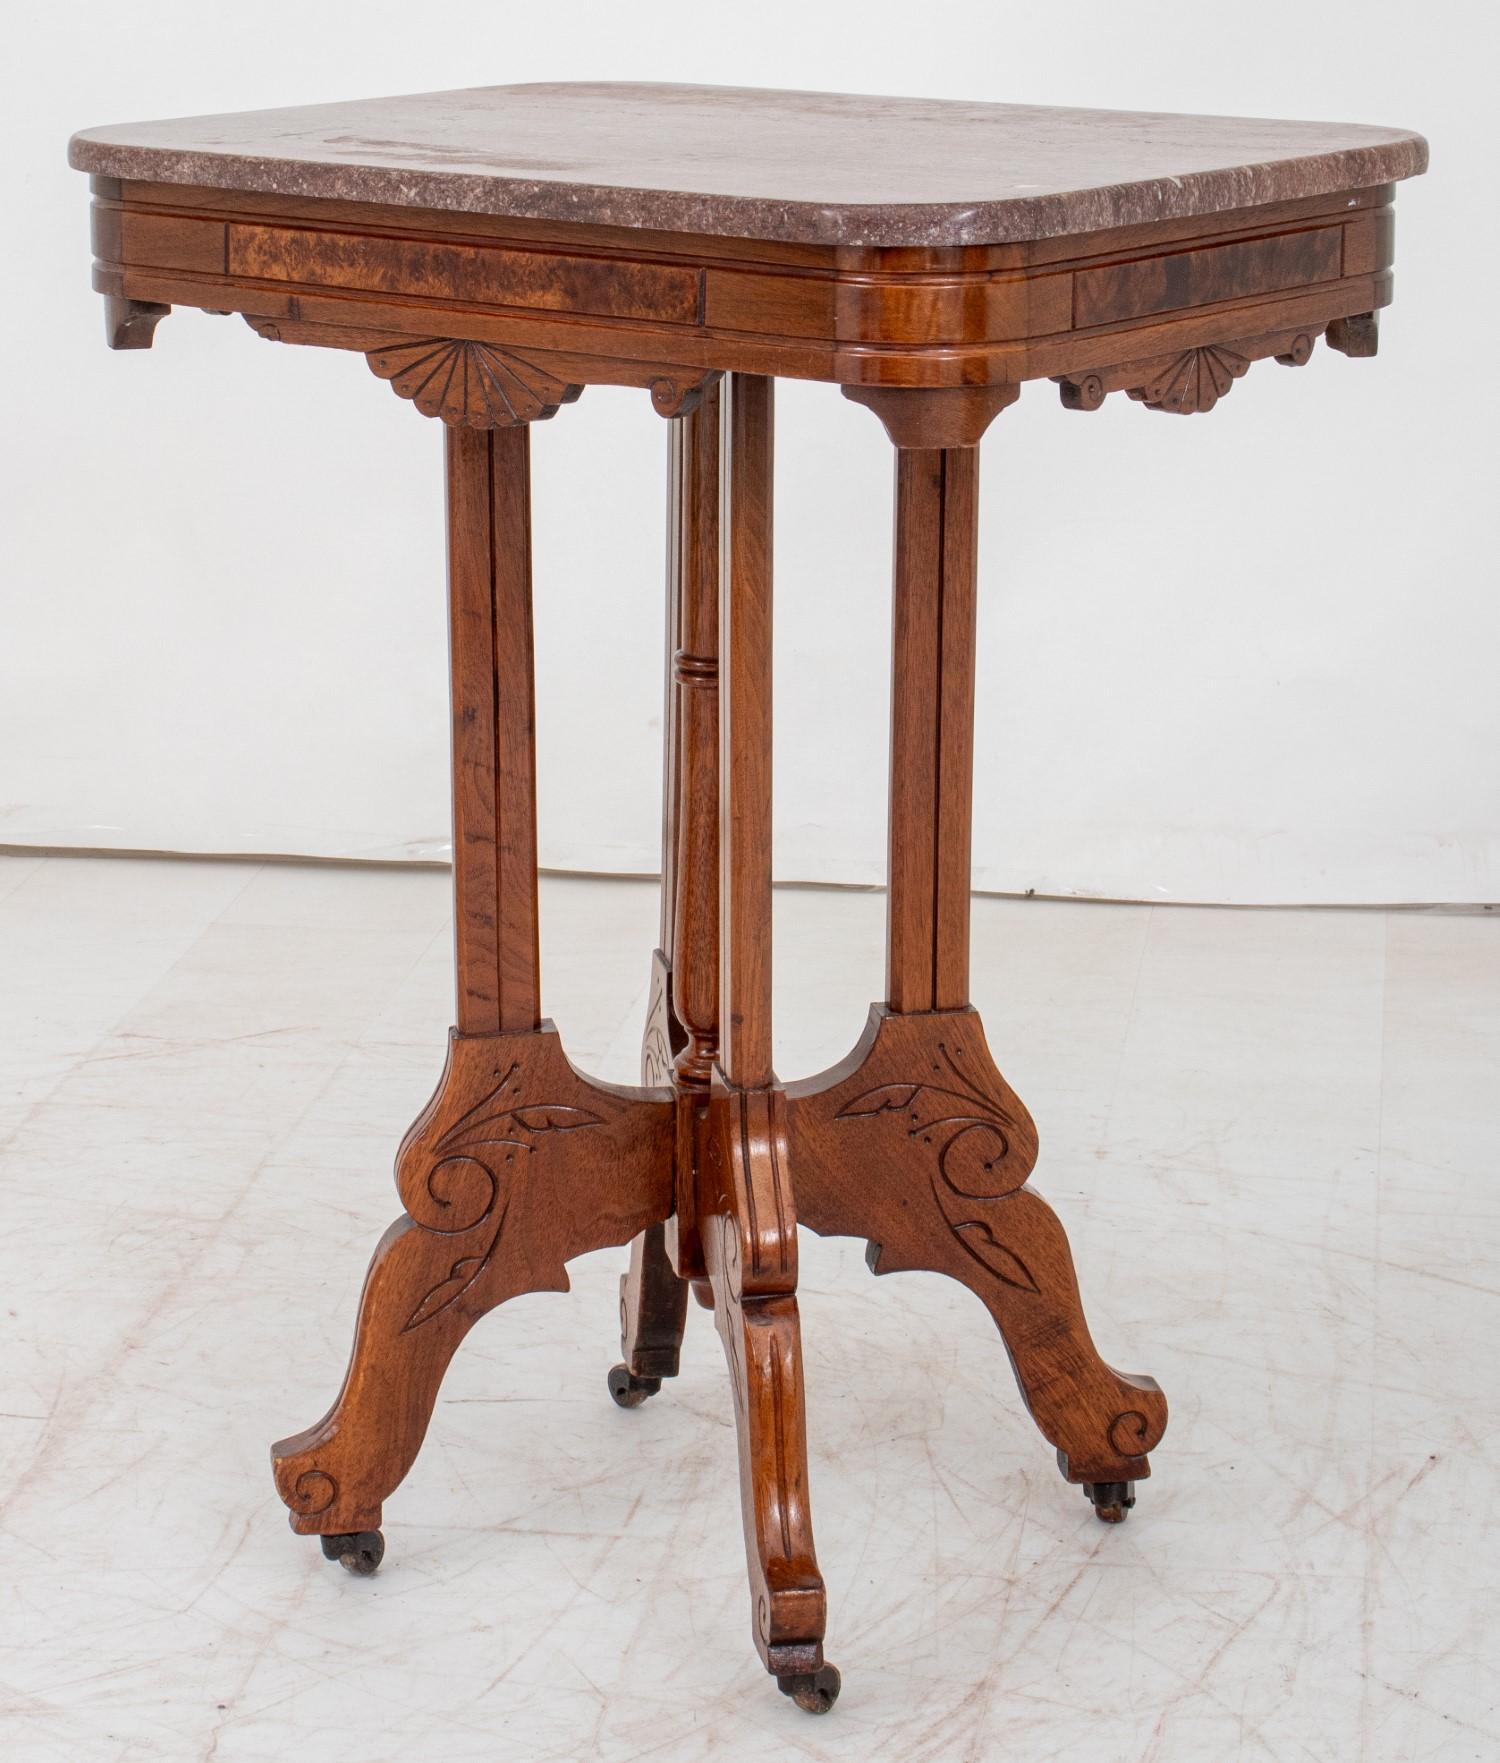 Victorian Style Walnut Marble Top Table with  incised decoration foliate decoration and  burl wood trim, on four legs with casters.  30-inch height, 23.75-inch width, and 17-inch depth, this table is perfect for smaller spaces or as an accent piece